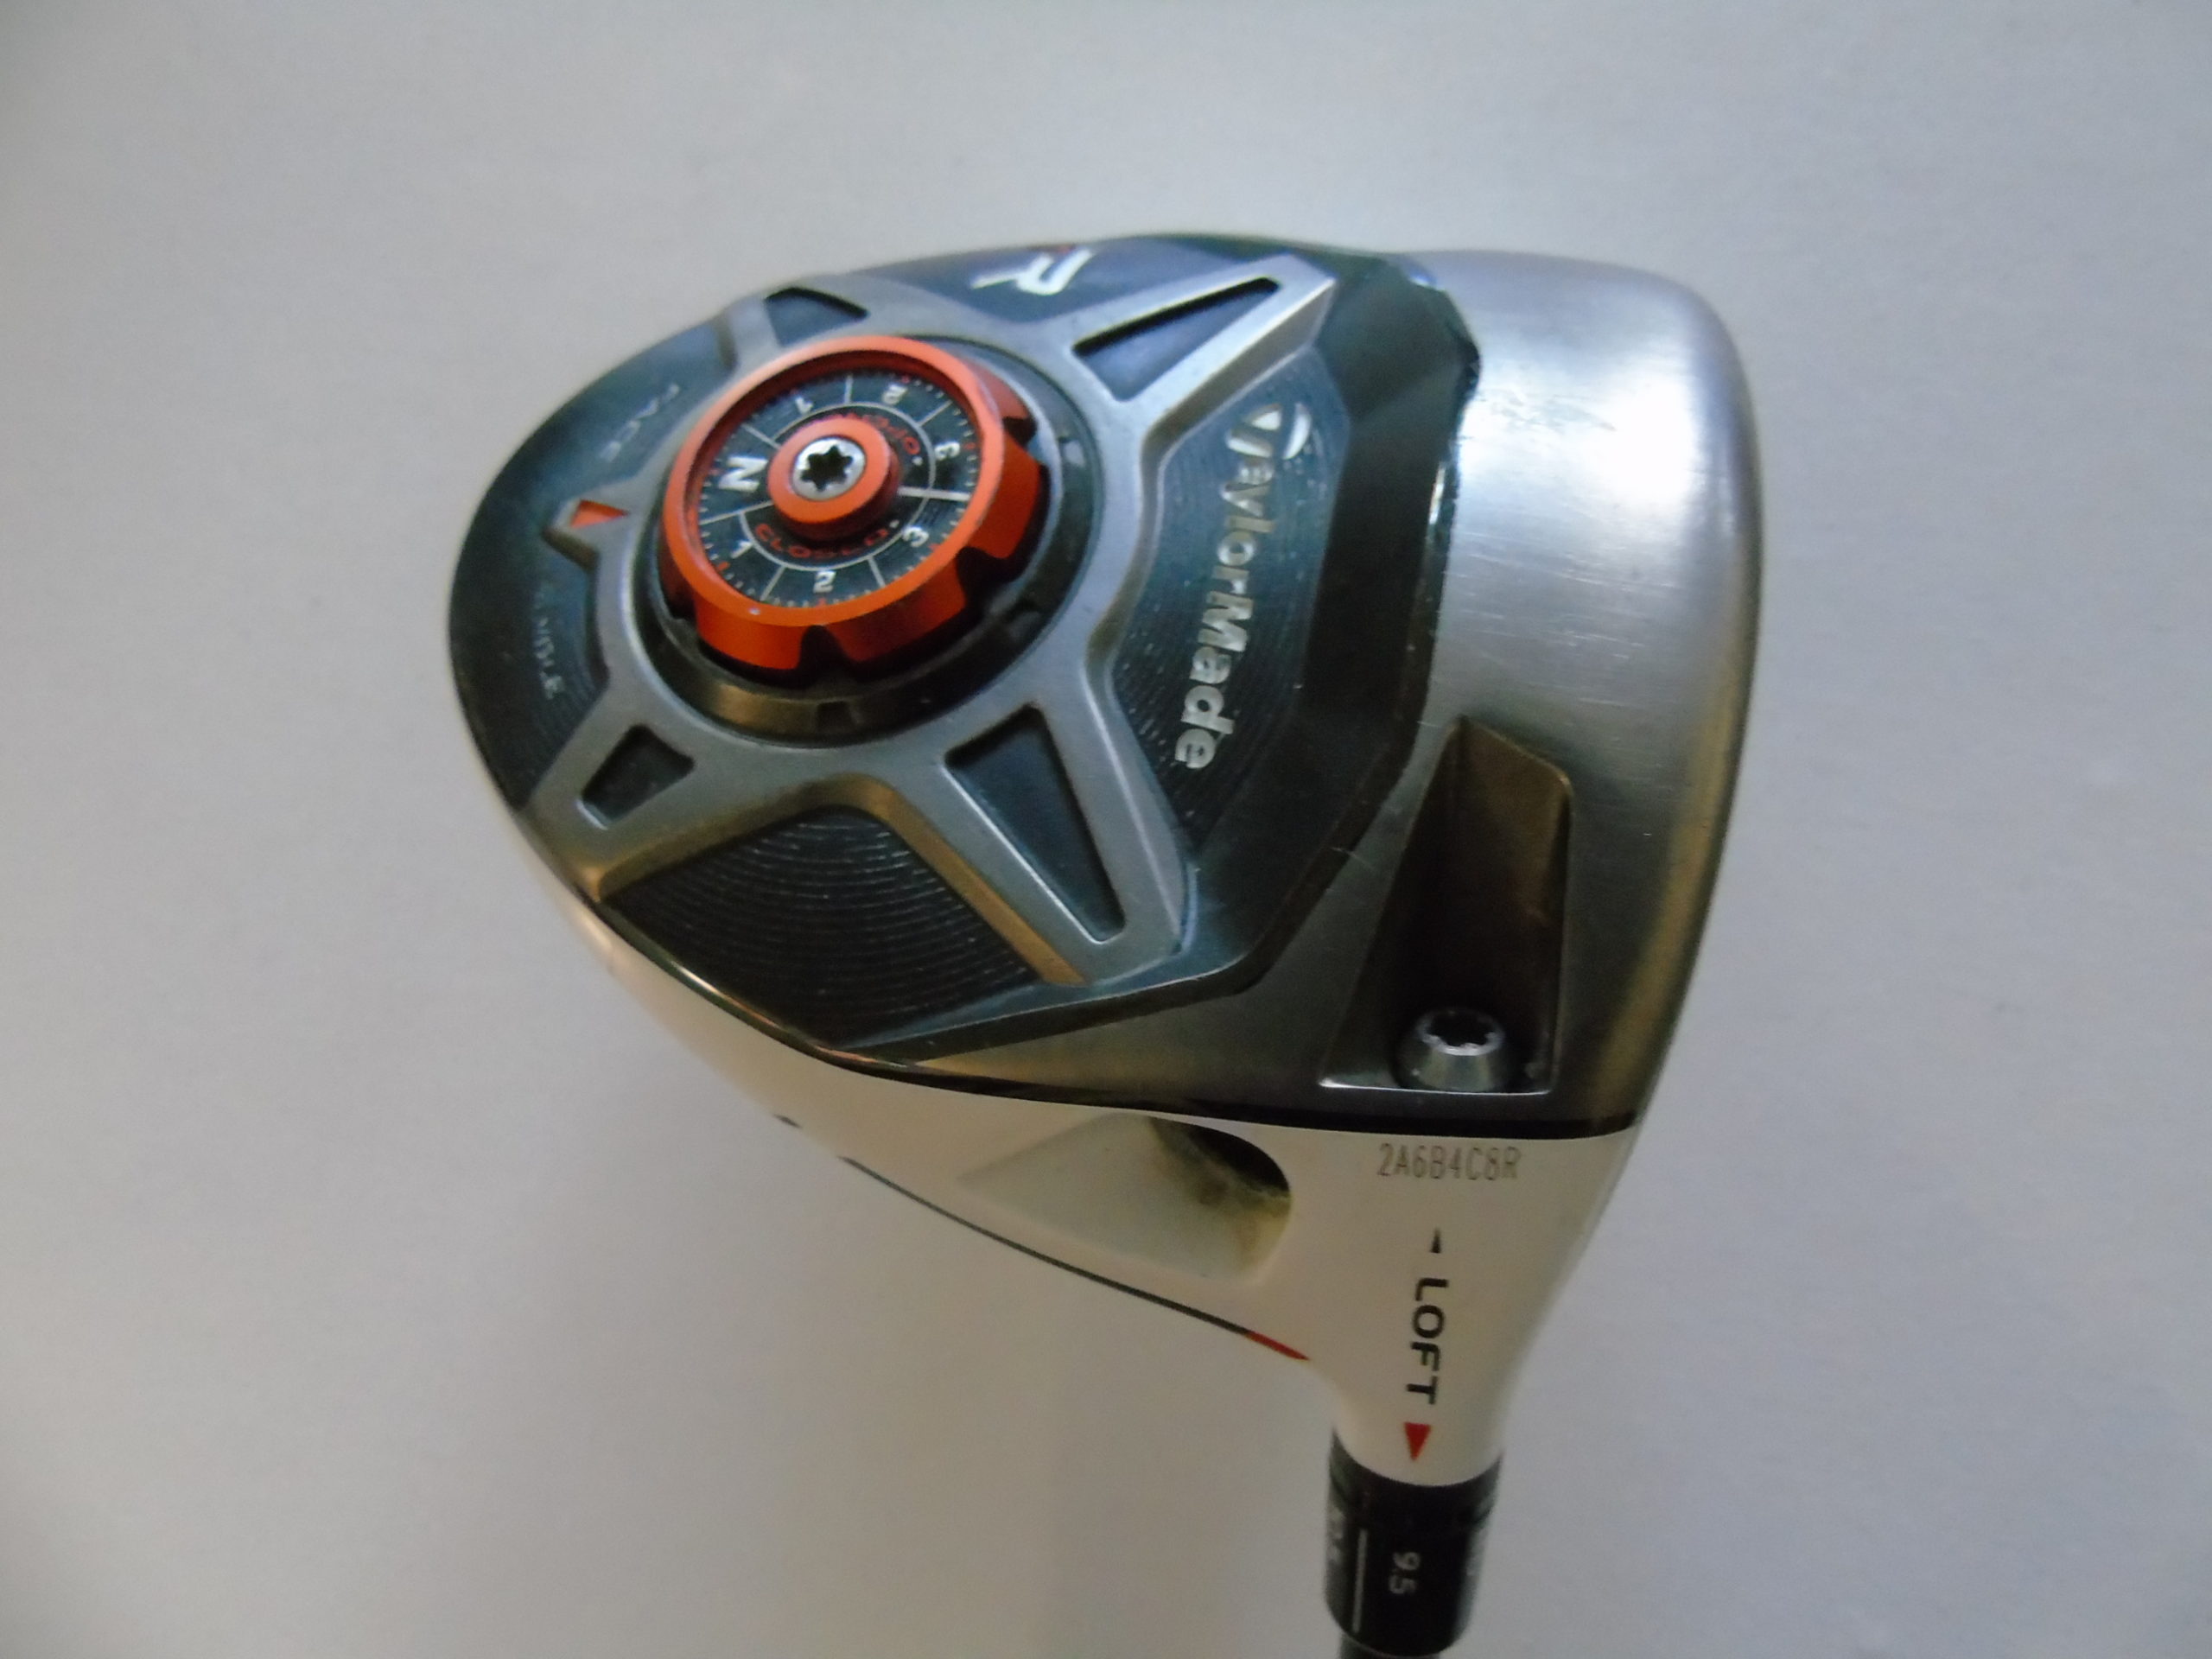 TAYLORMADE R1 DRIVER ADJUSTABLE LOFT STIFF 55g RIP PHENOM GRAPHITE SHAFT  SOLD New And Used Golf Clubs Est. 1985